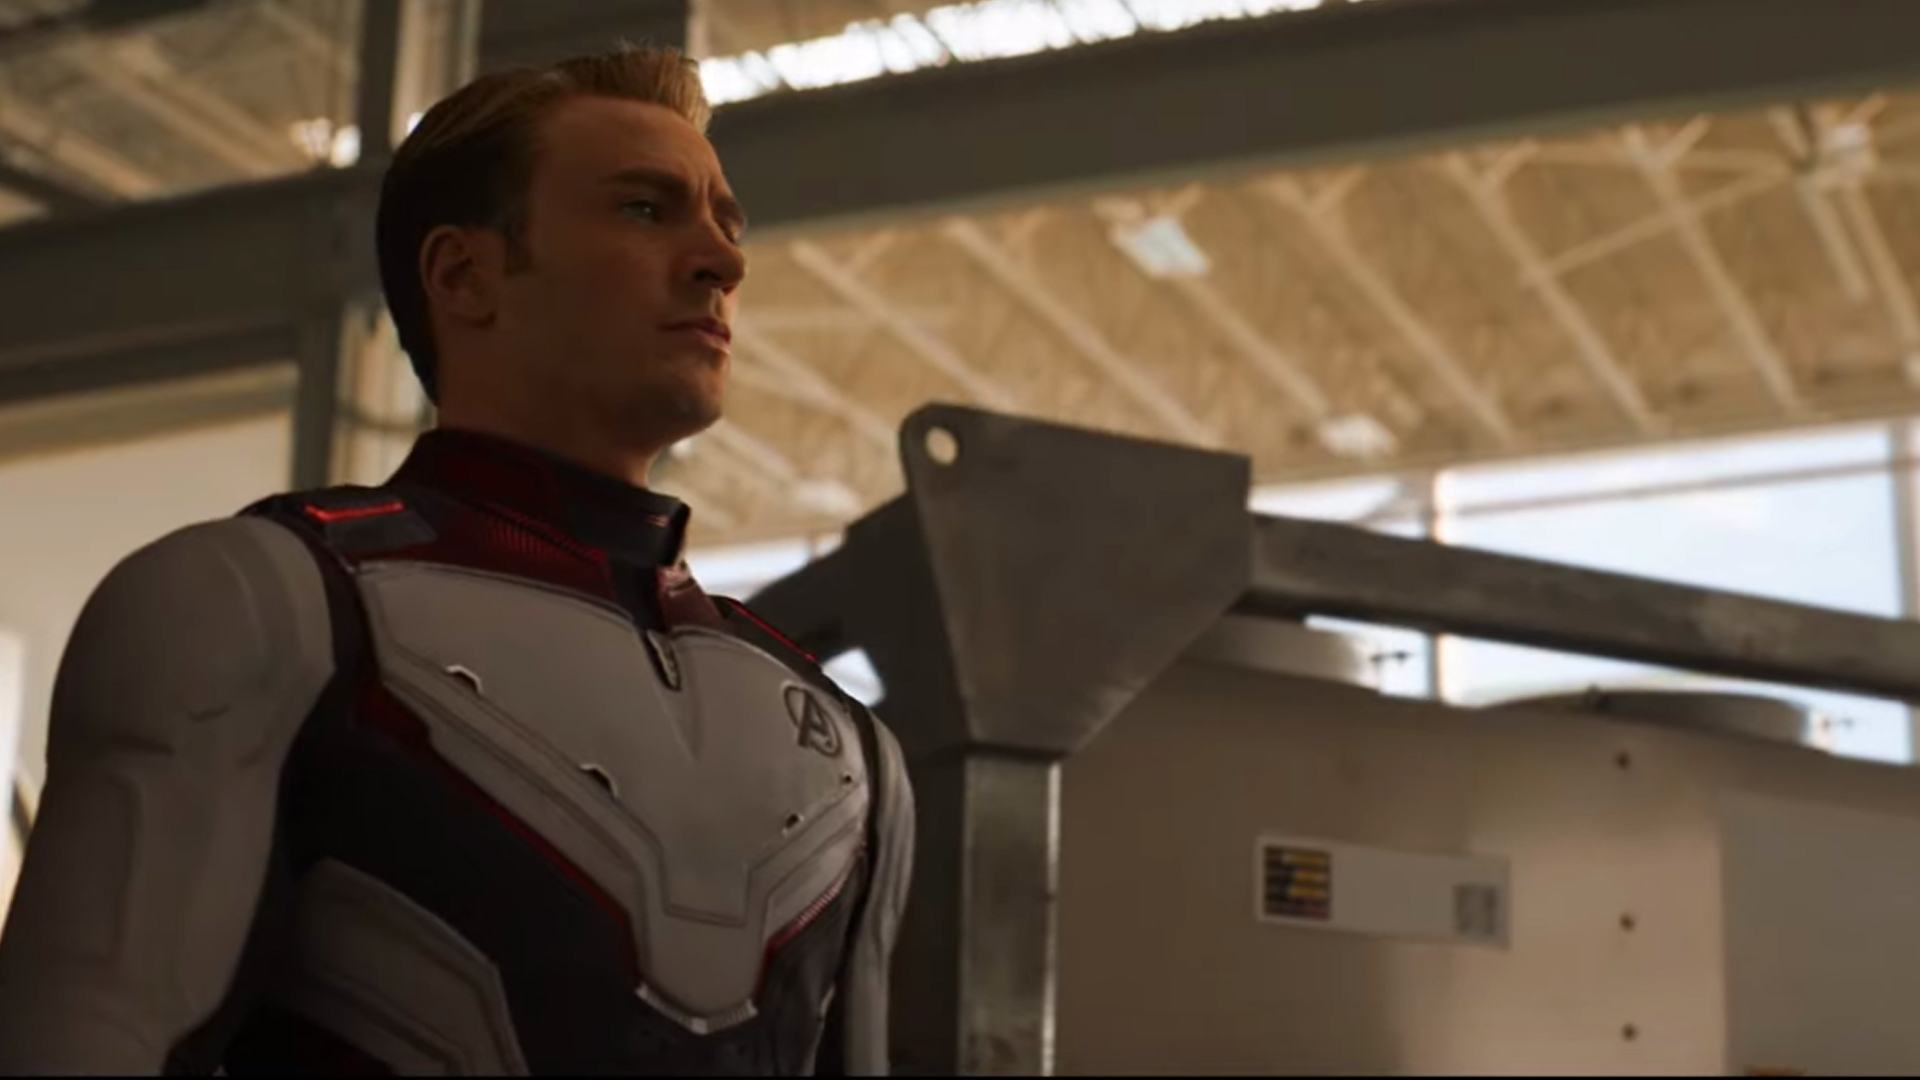 avengers endgame official trailer explained full breakdown on everything you missed in regards to the teaser and fan theories on easter eggs